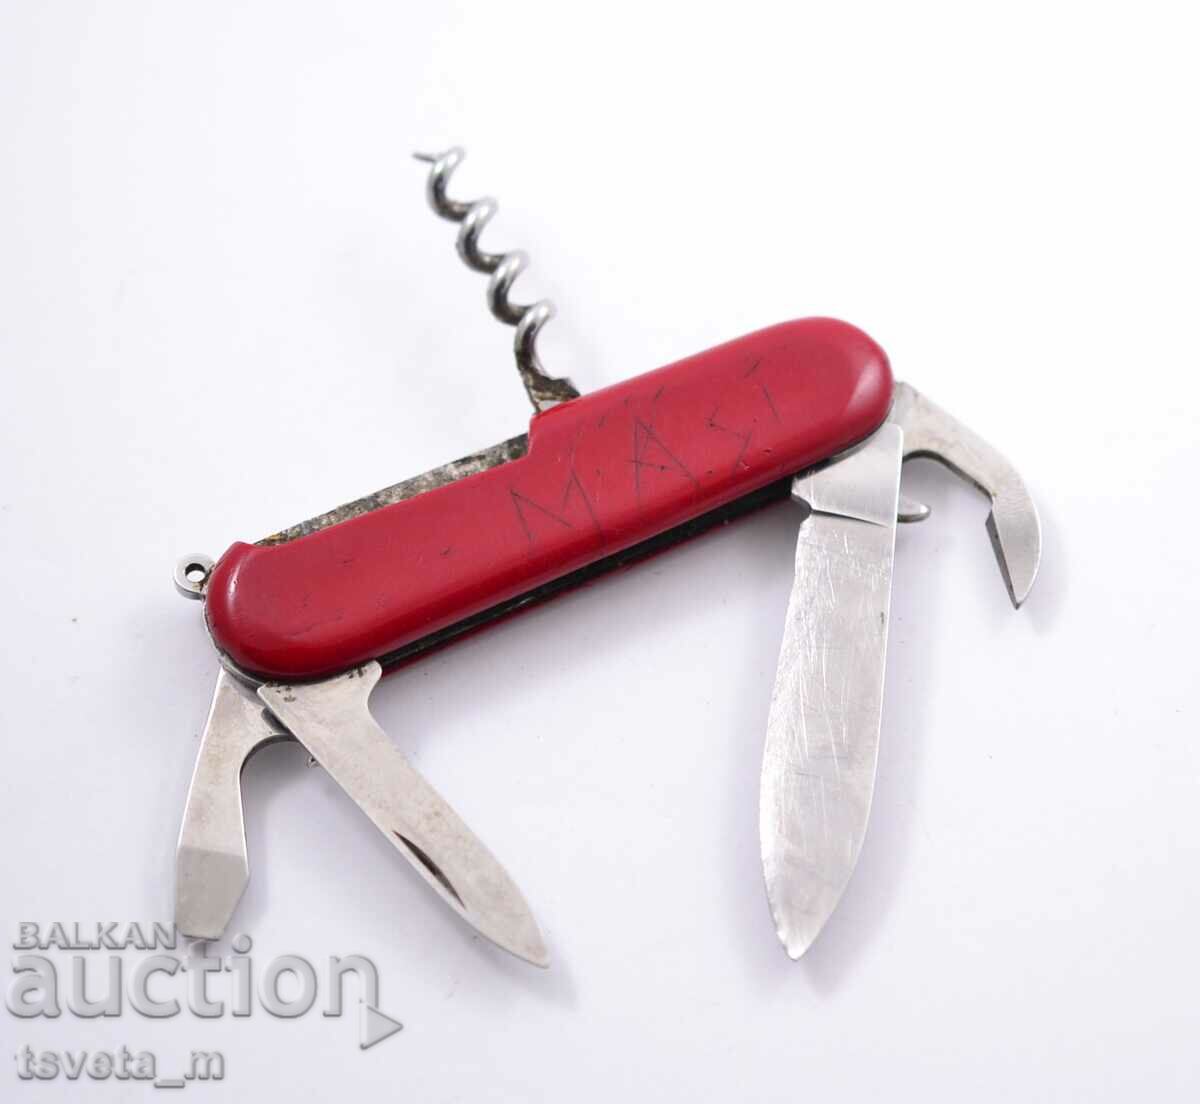 Pocket knife with 5 tools, Swiss made